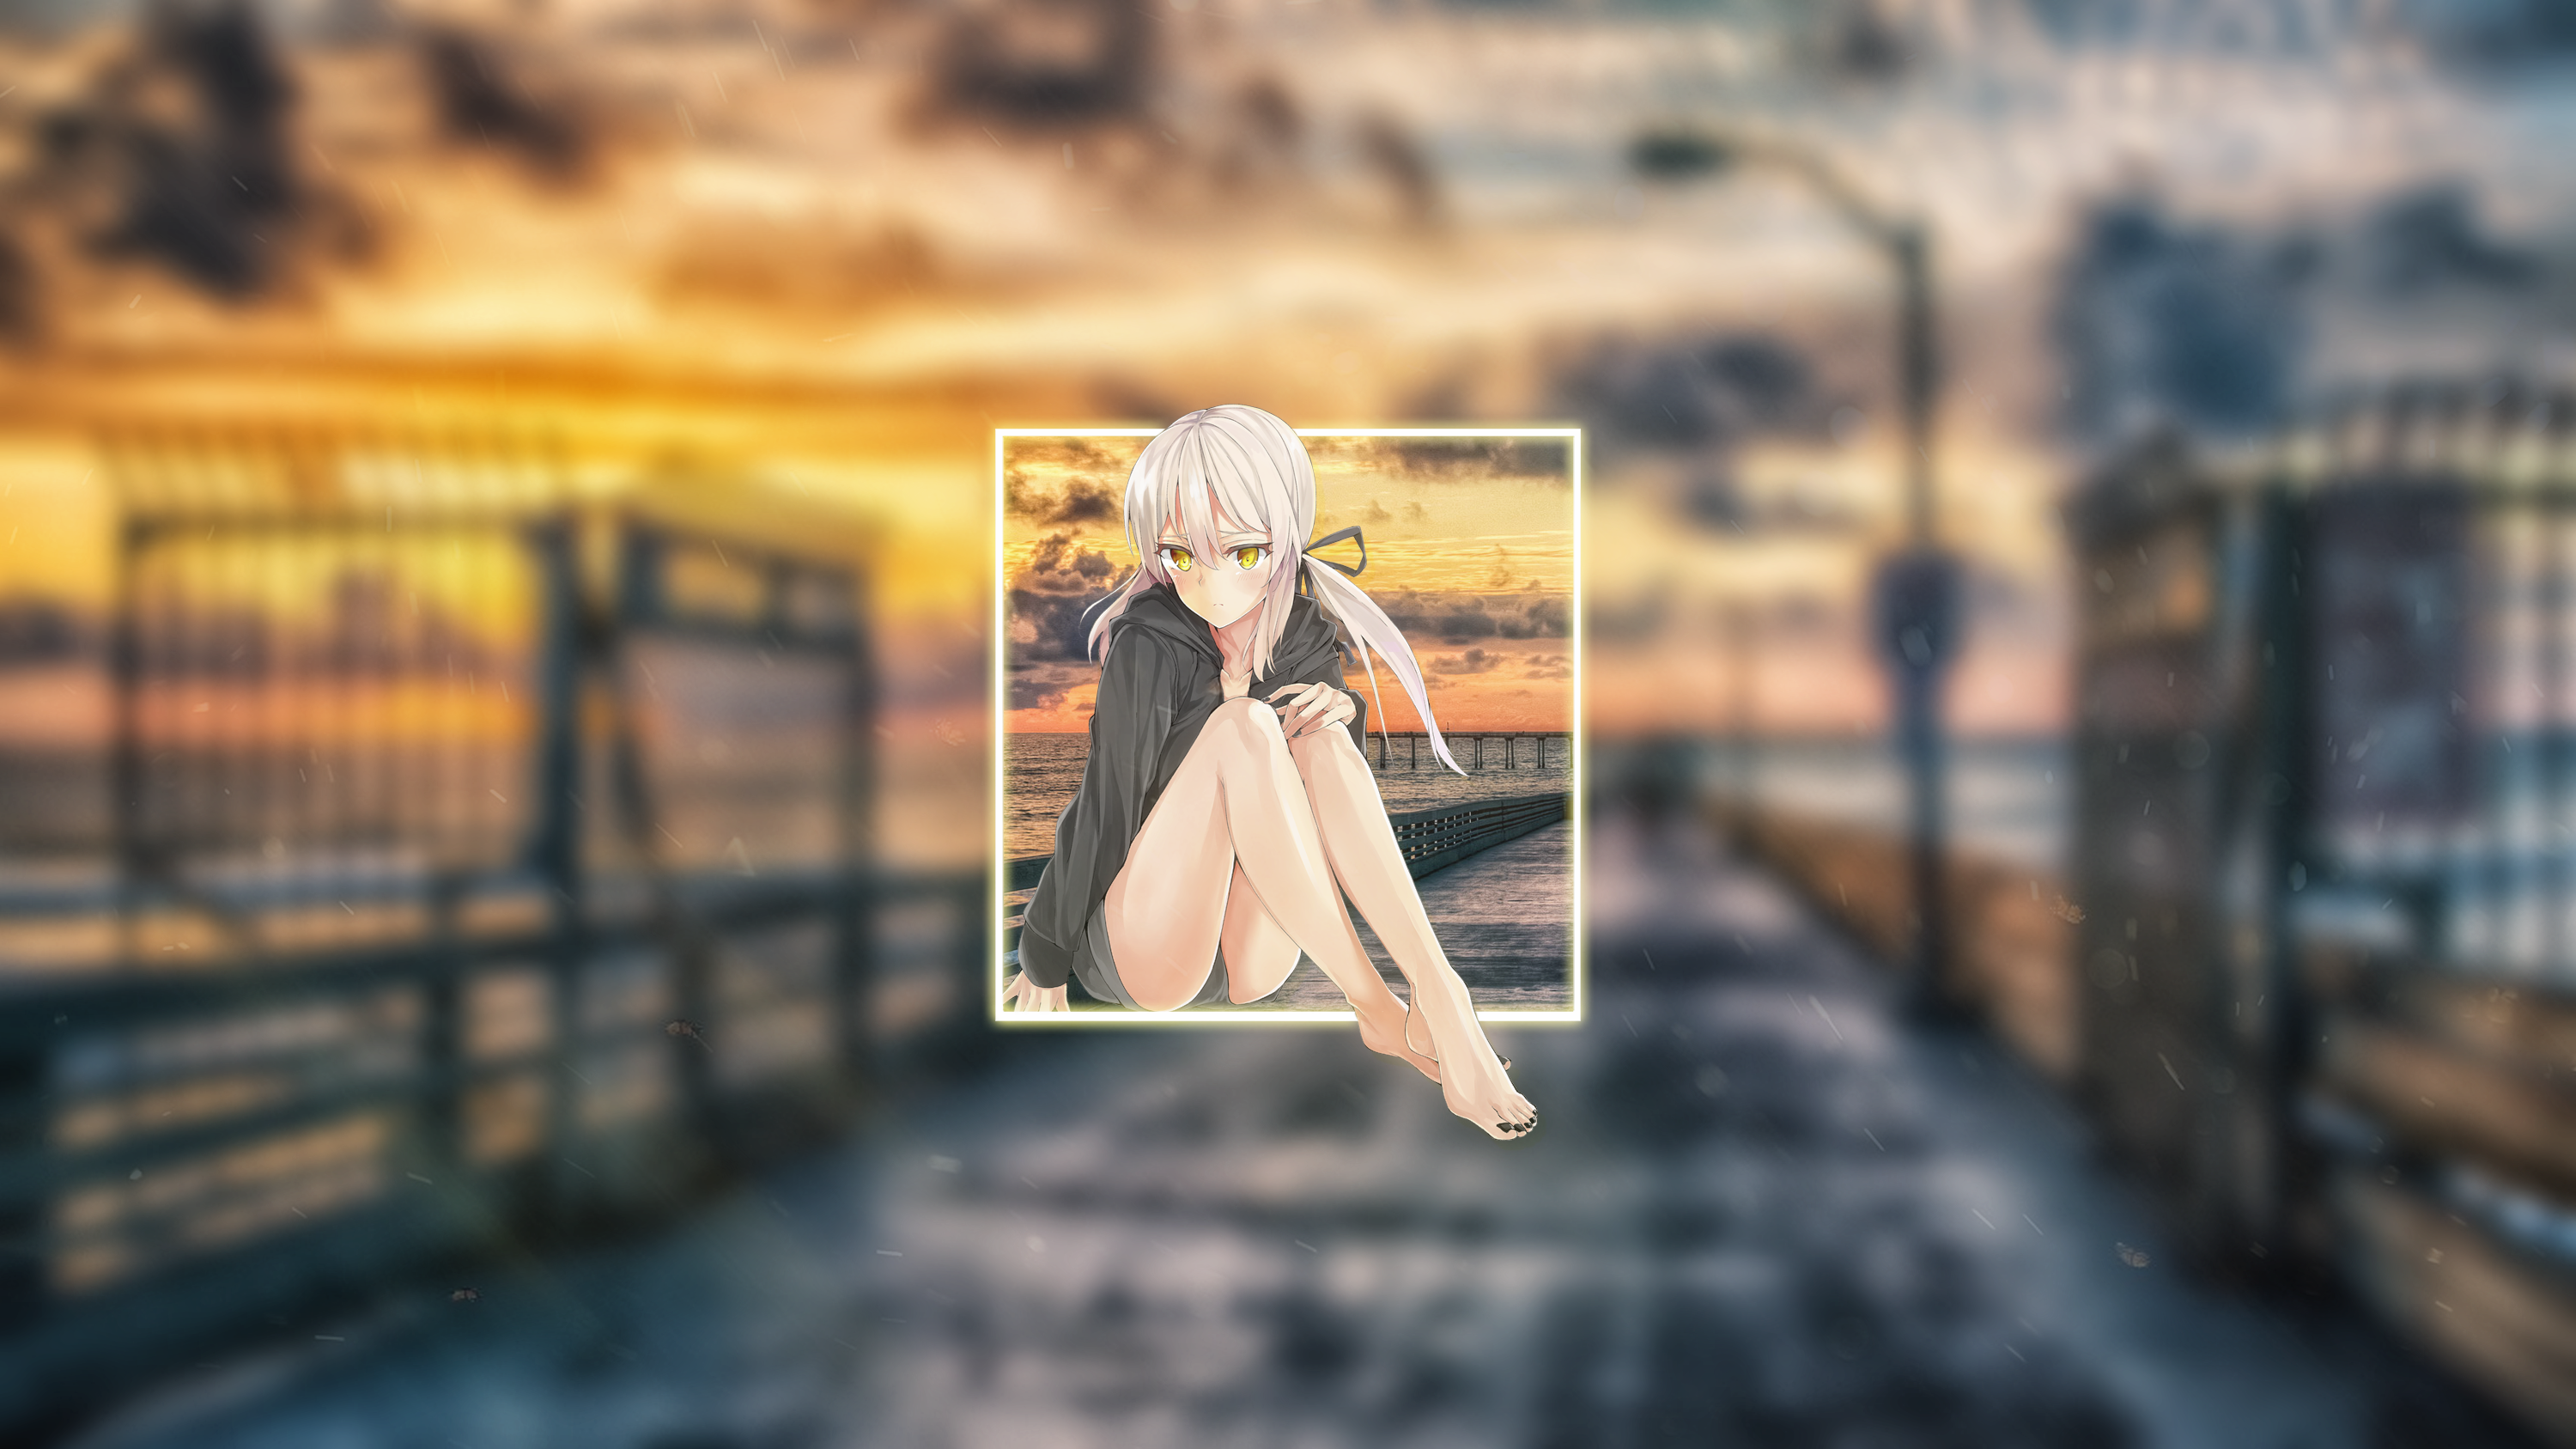 Anime 3000x1687 picture-in-picture anime anime girls silver hair yellow eyes legs shorts